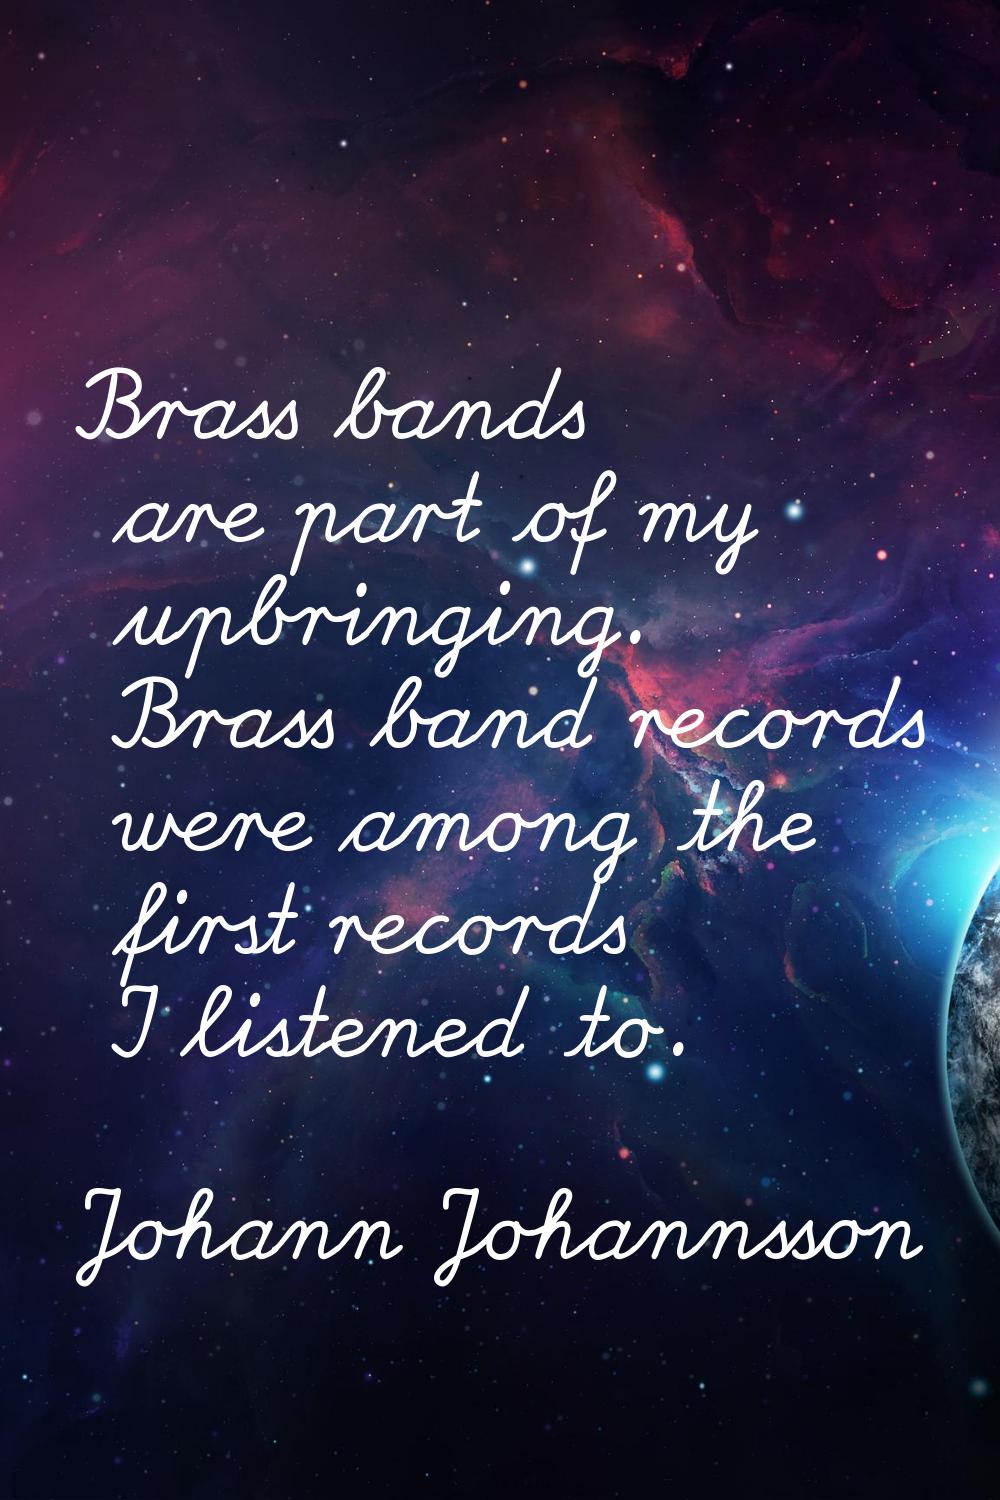 Brass bands are part of my upbringing. Brass band records were among the first records I listened t